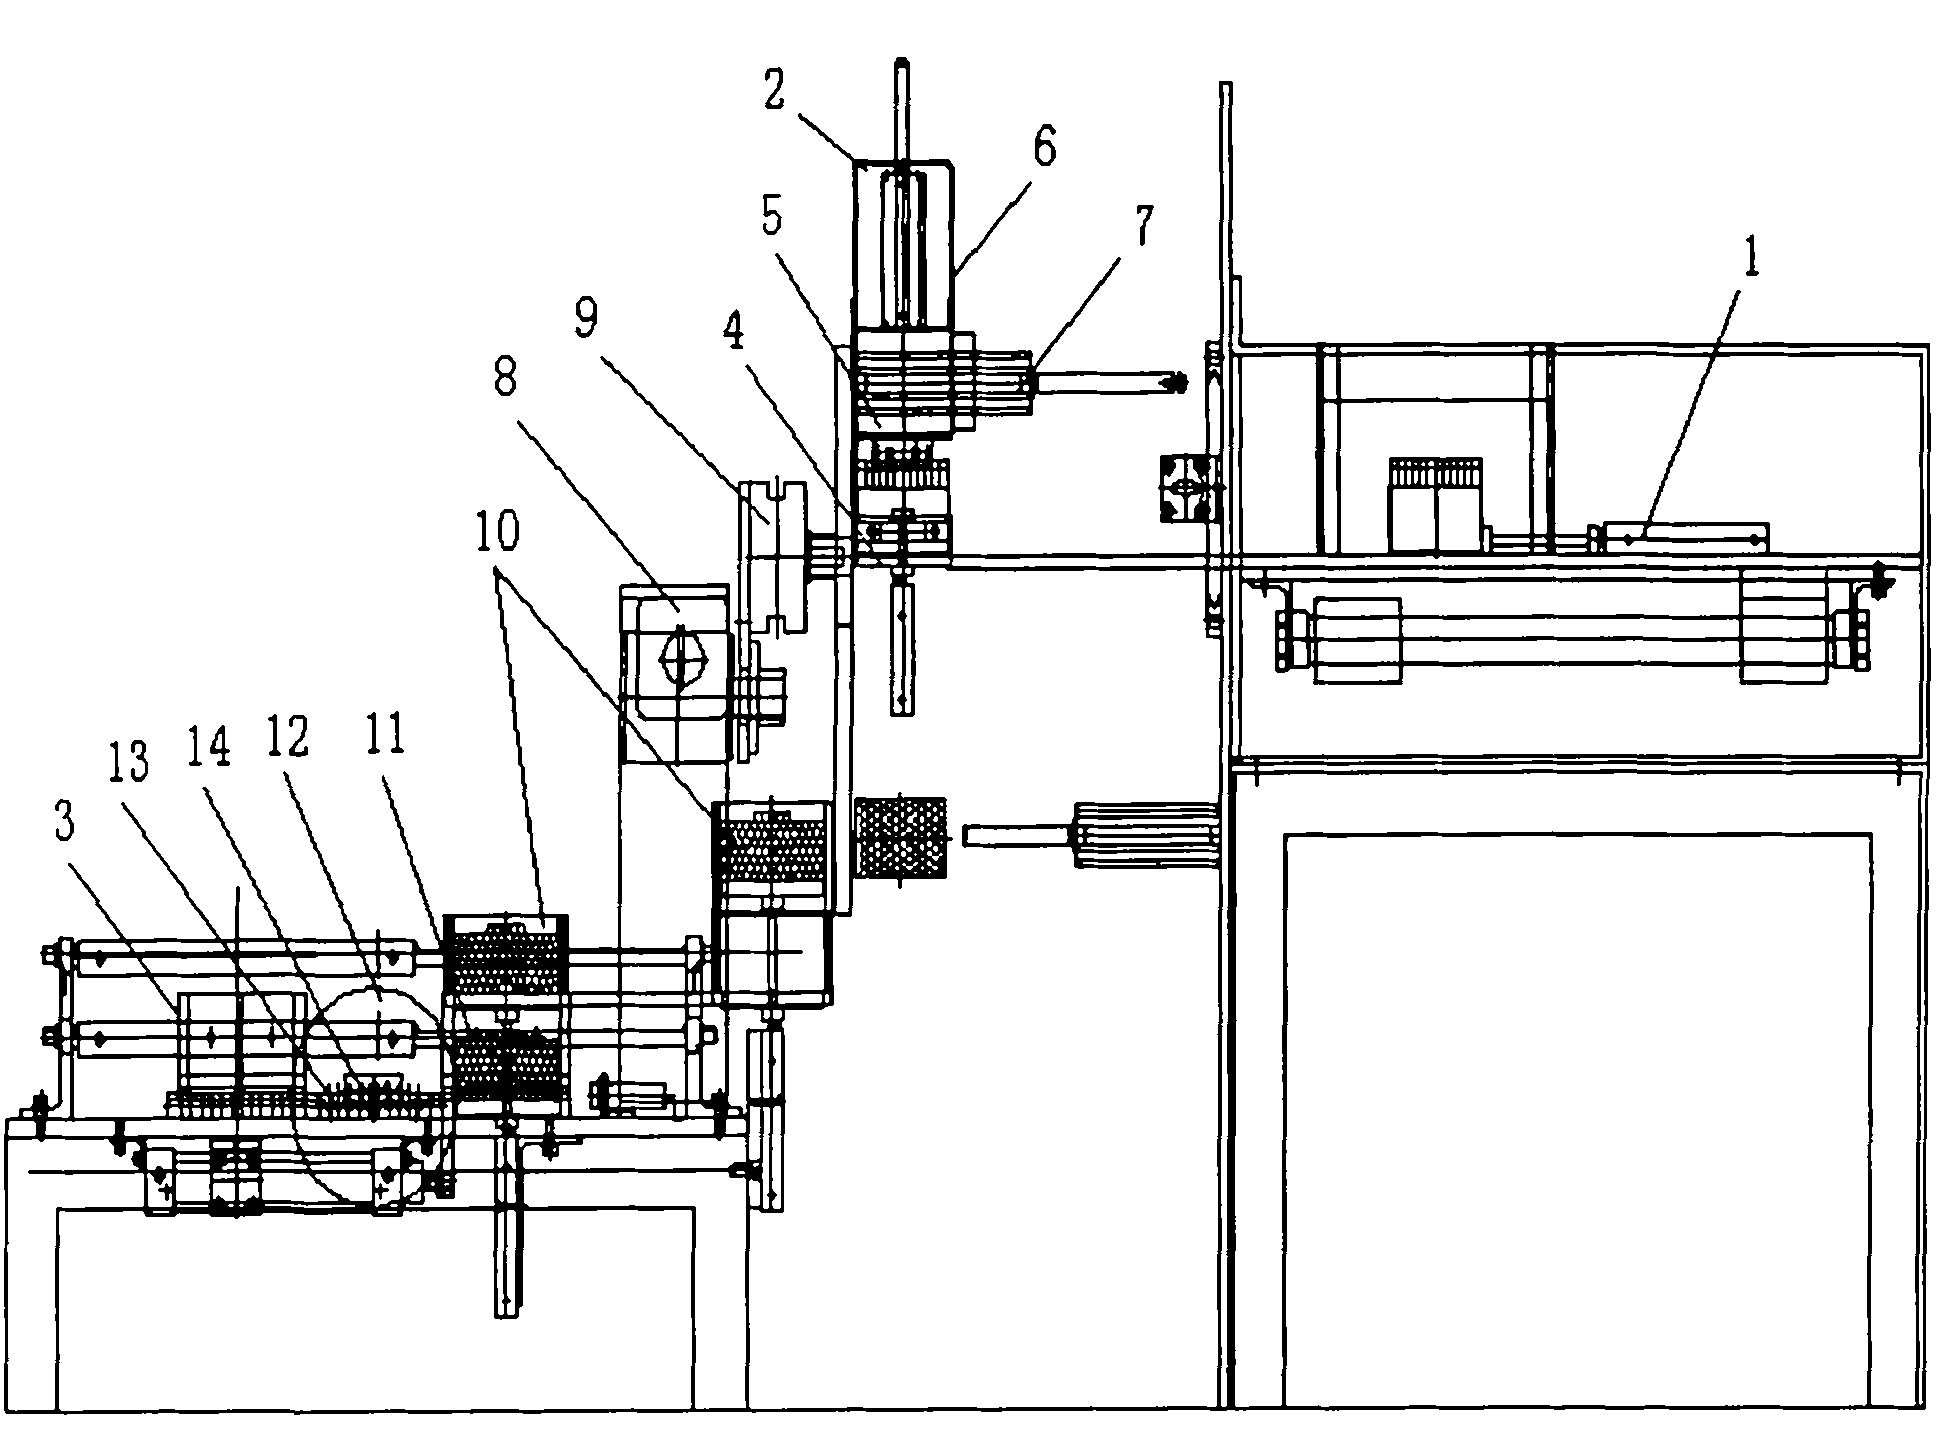 Machine for automatically assembling detonator into die